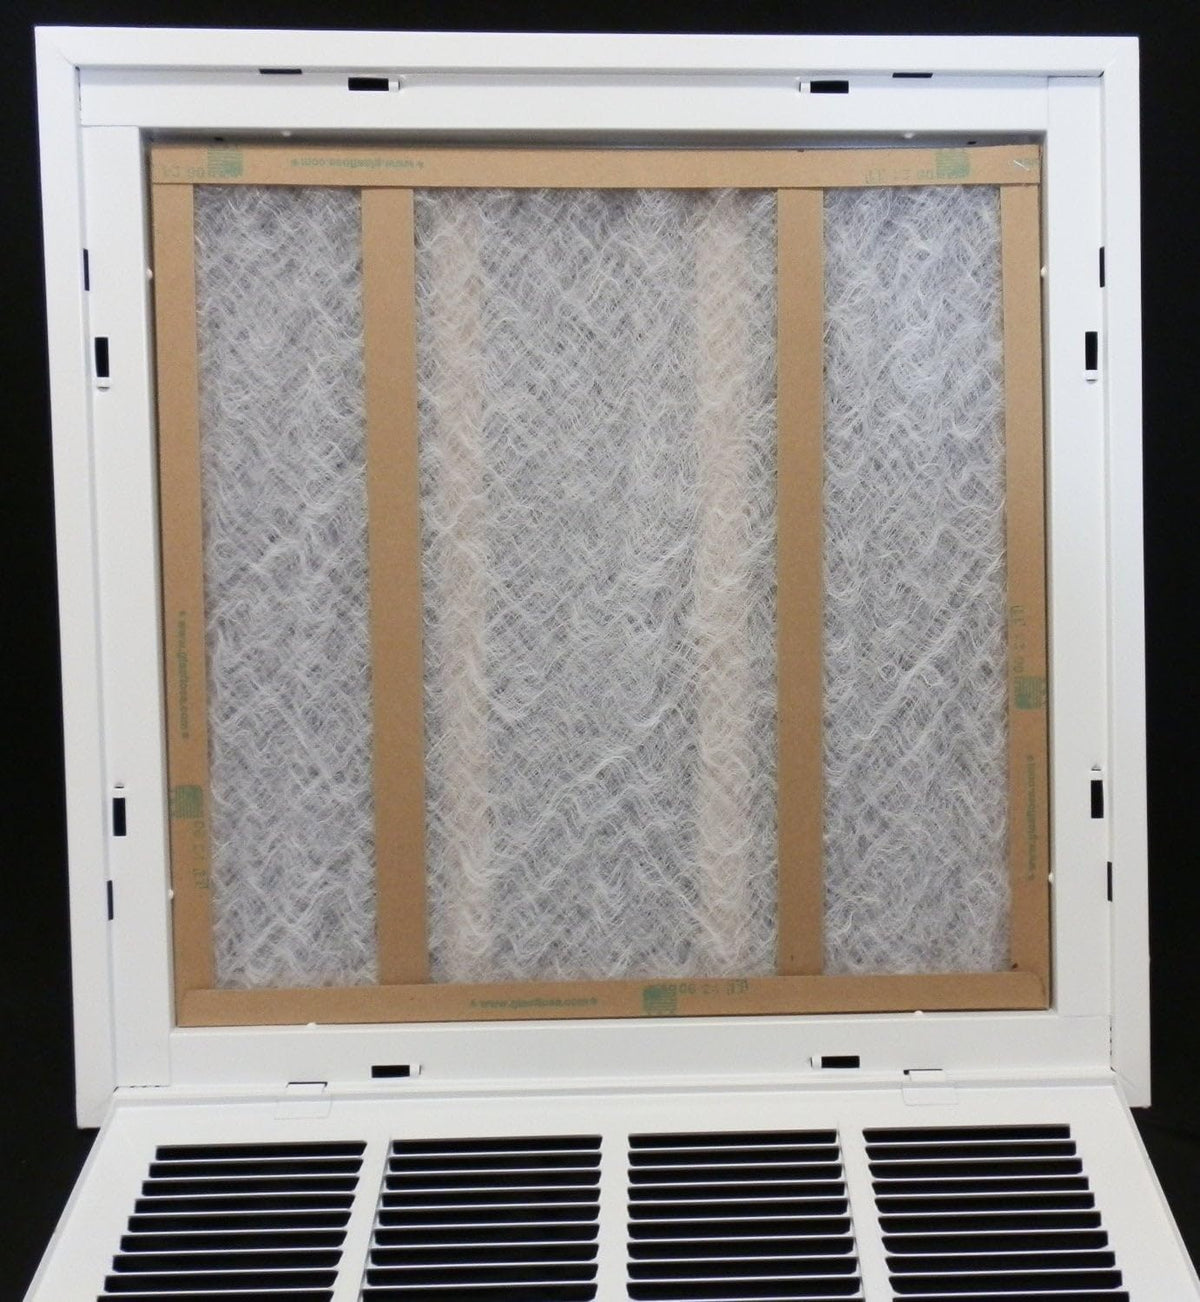 25&quot; X 16&quot; Steel Return Air Filter Grille for 1&quot; Filter - Fixed Hinged - [Outer Dimensions: 27 5/8&quot; X 18 5/8&quot;]